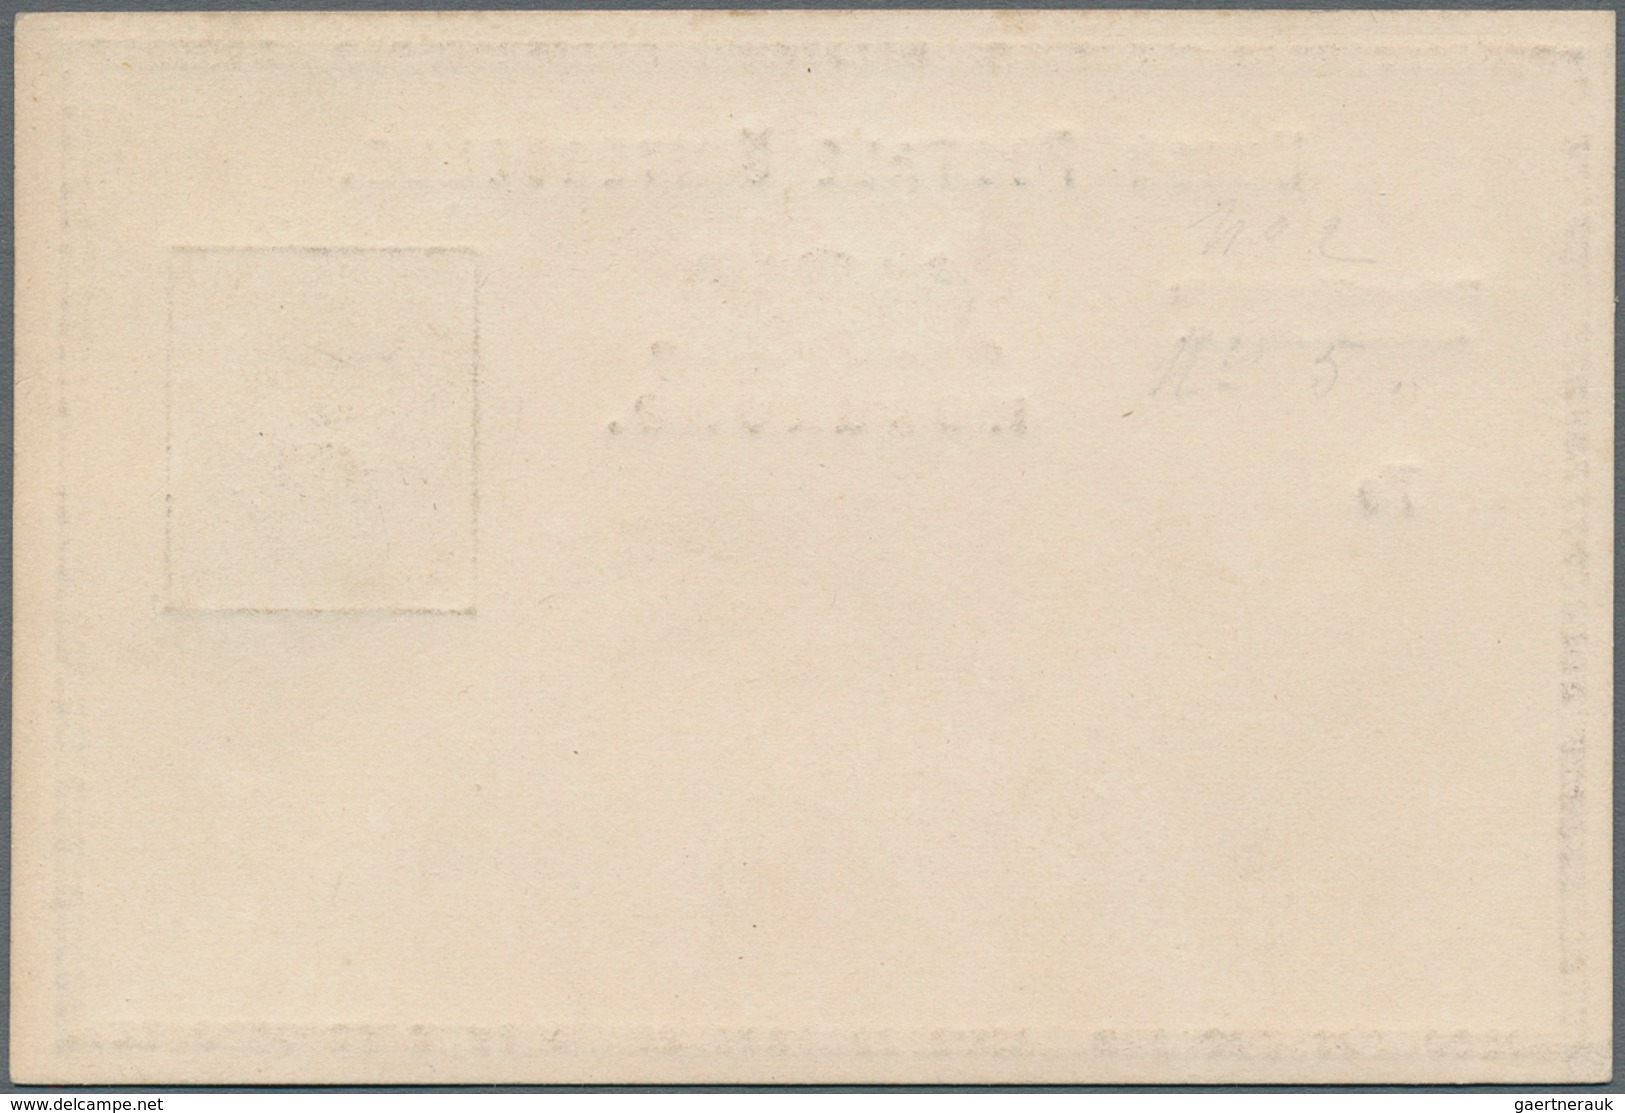 Hongkong - Ganzsachen: 1879, 3 C./10 C. On Pale Red Imprinted Form And 5 C./18 C. On Blue Imprinted - Postal Stationery